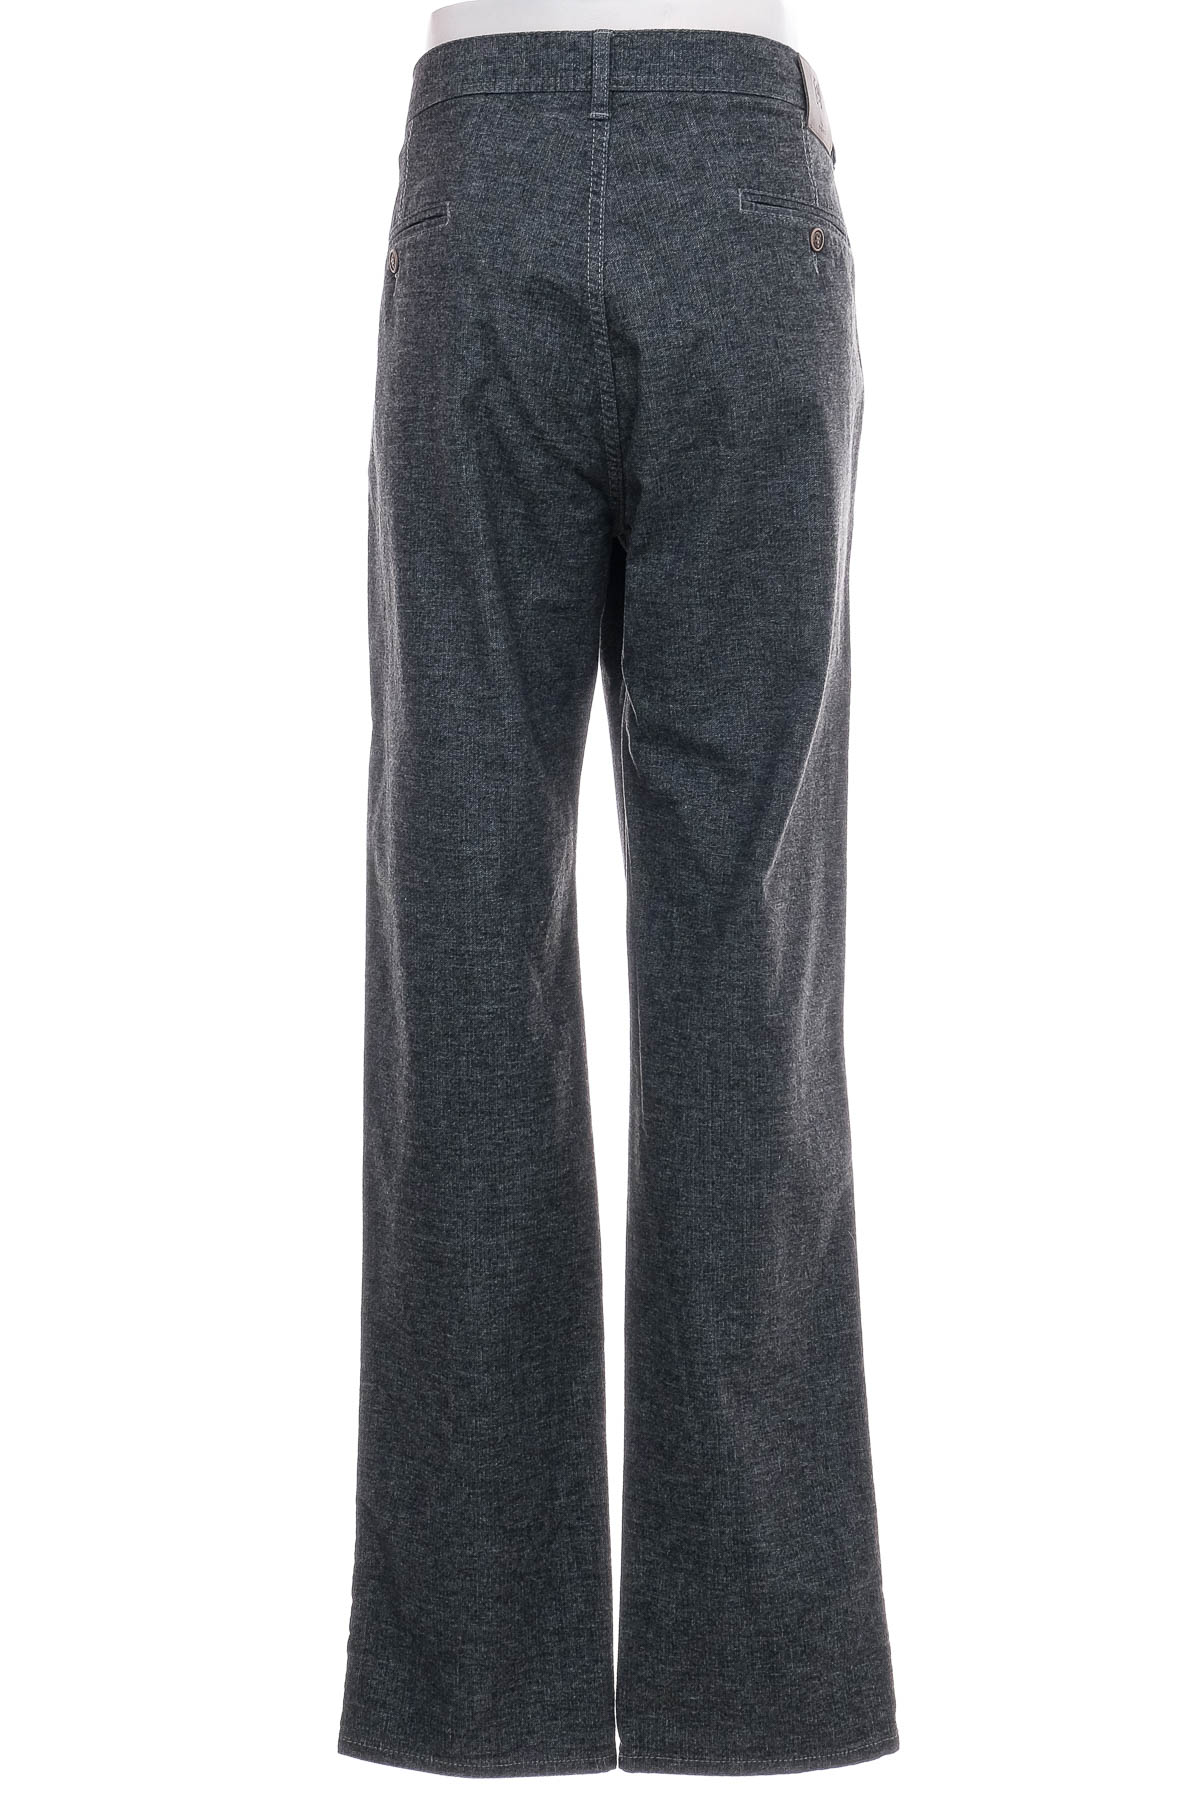 Men's trousers - Engbers - 1